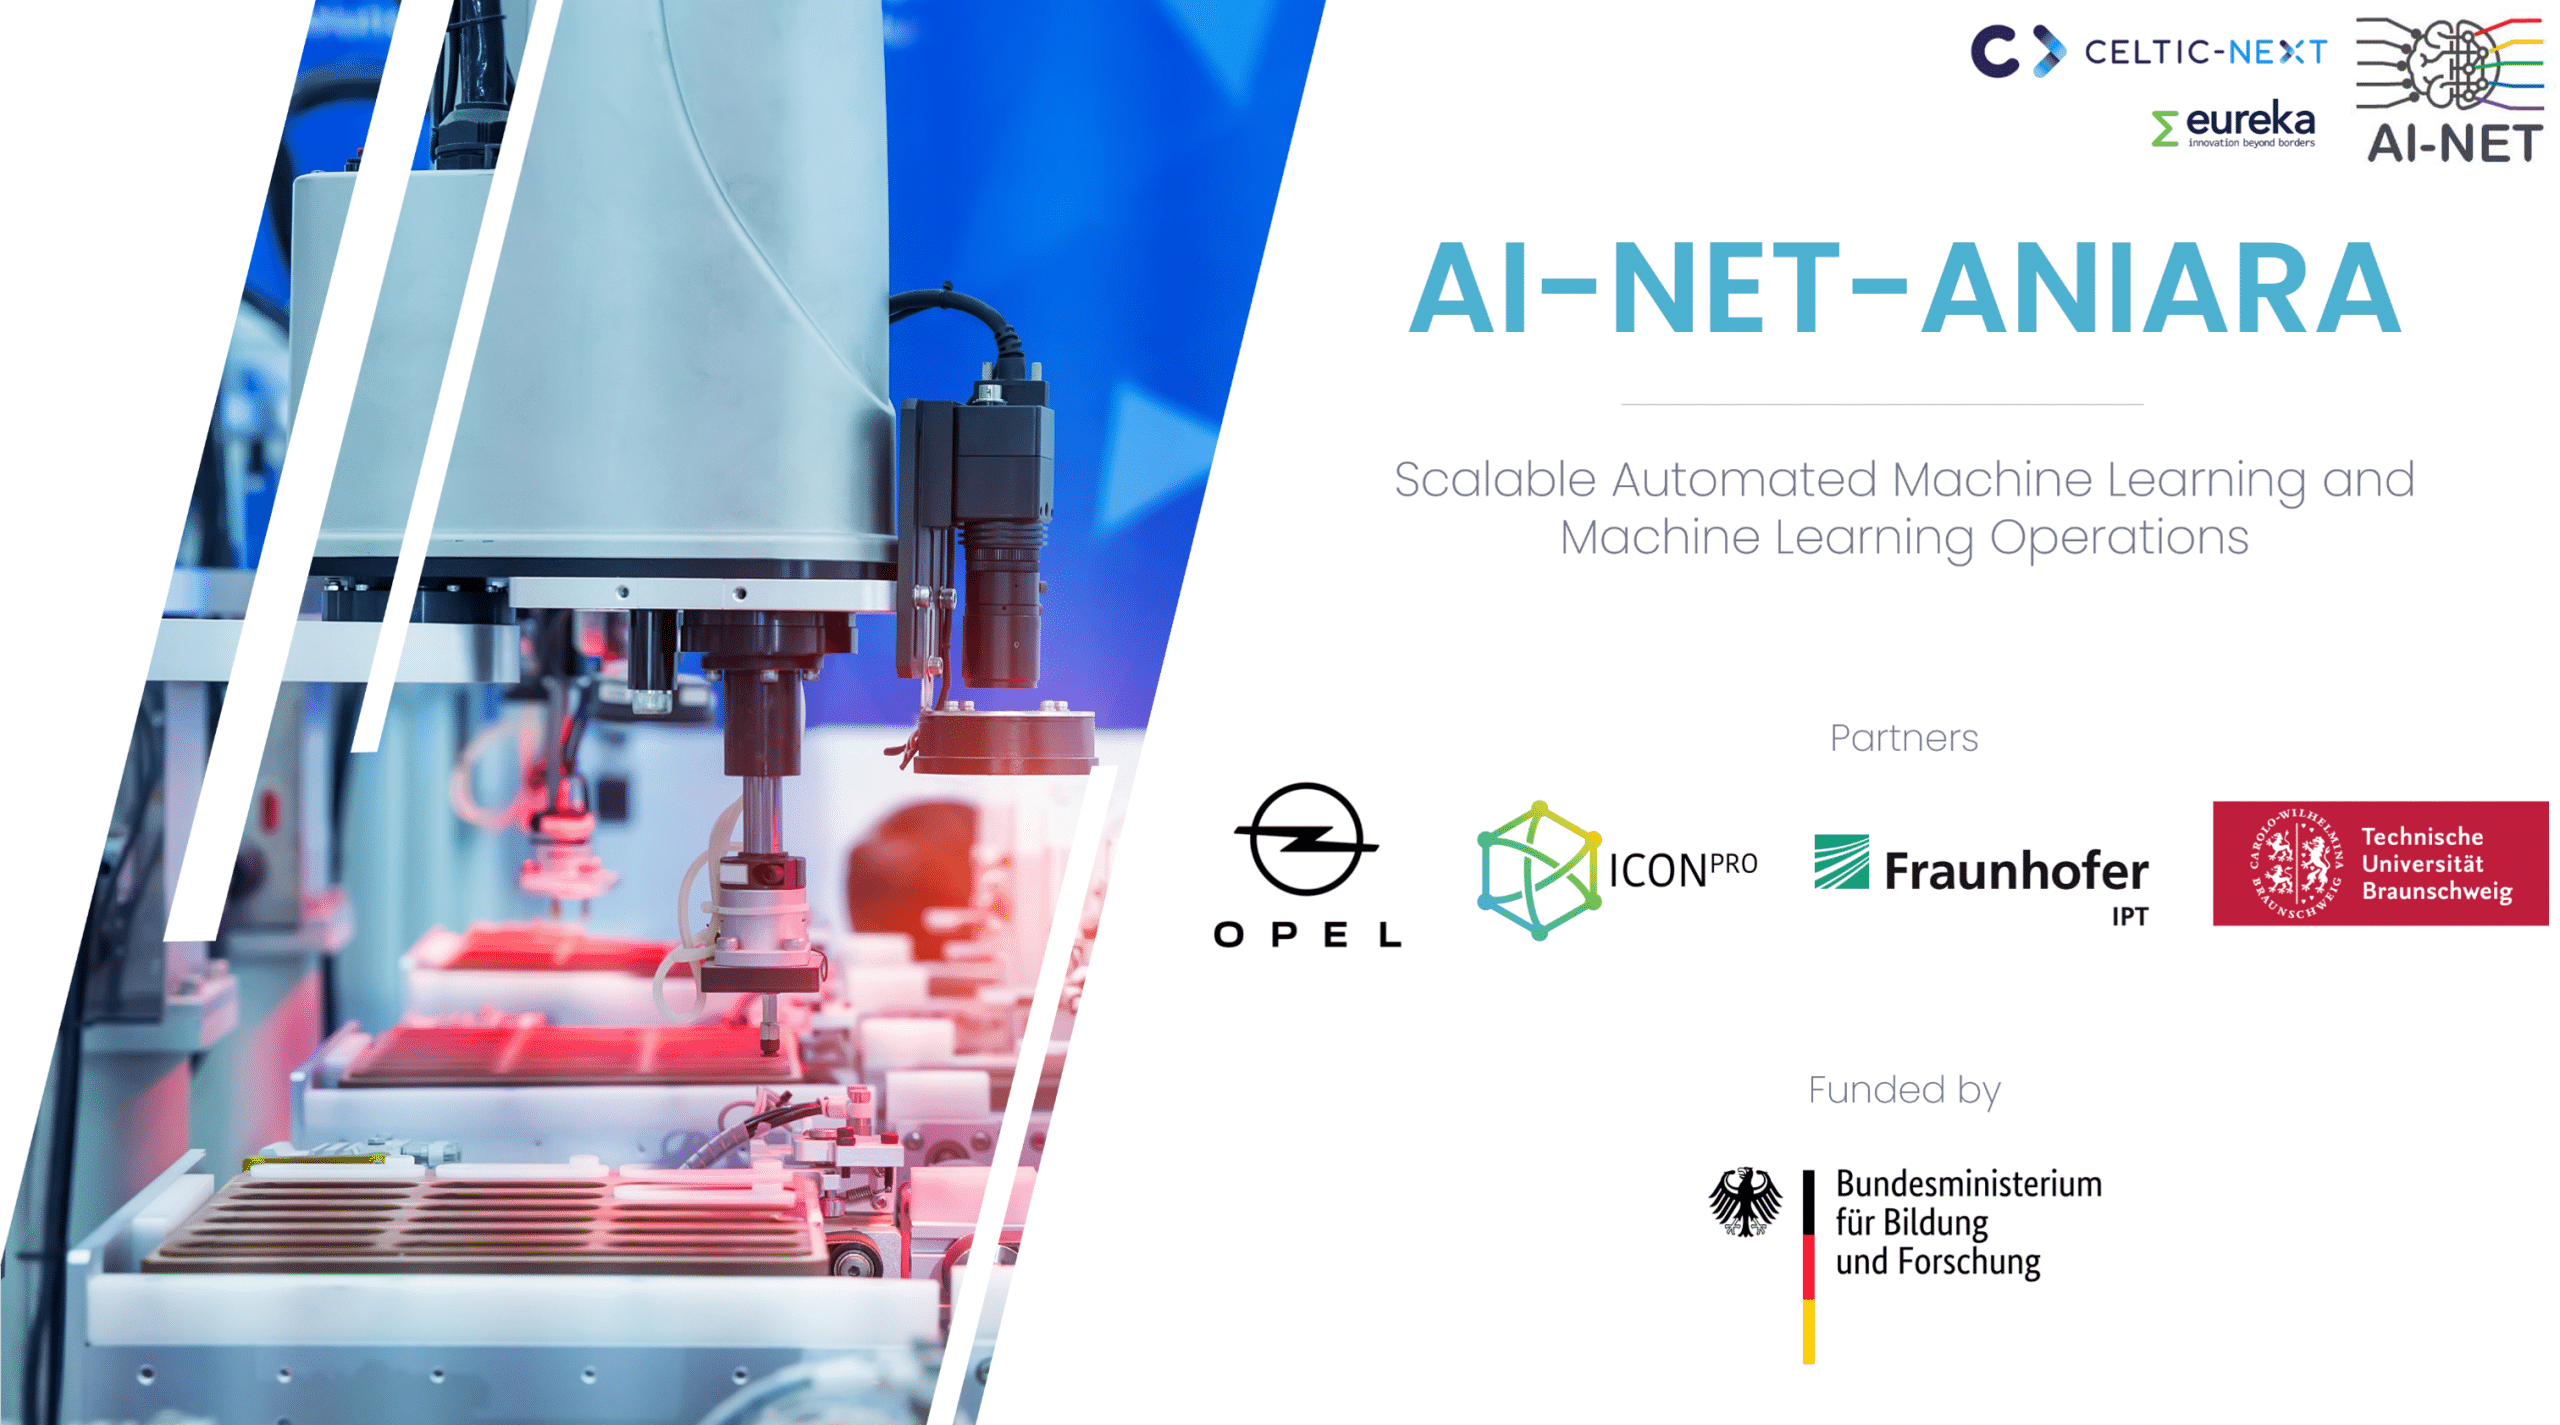 AI-NET-ANIARA Project – Scalable Automated Machine Learning and ML Operations